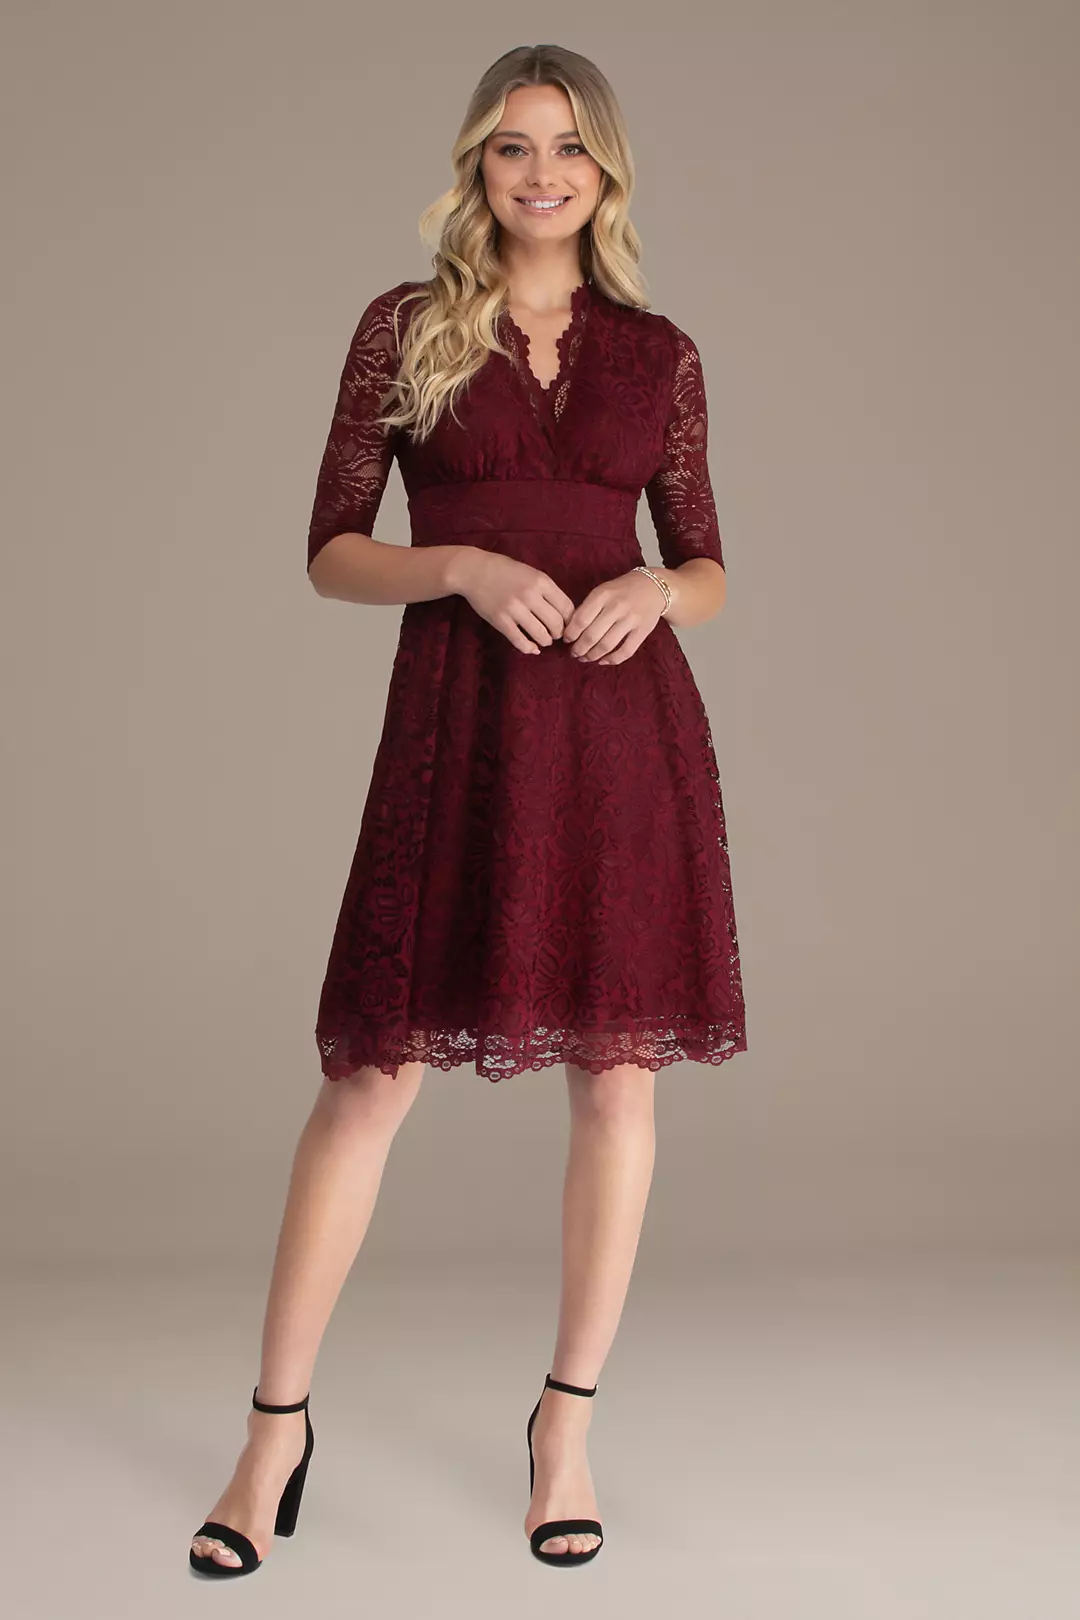 Mademoiselle Lace Cocktail Dress Image